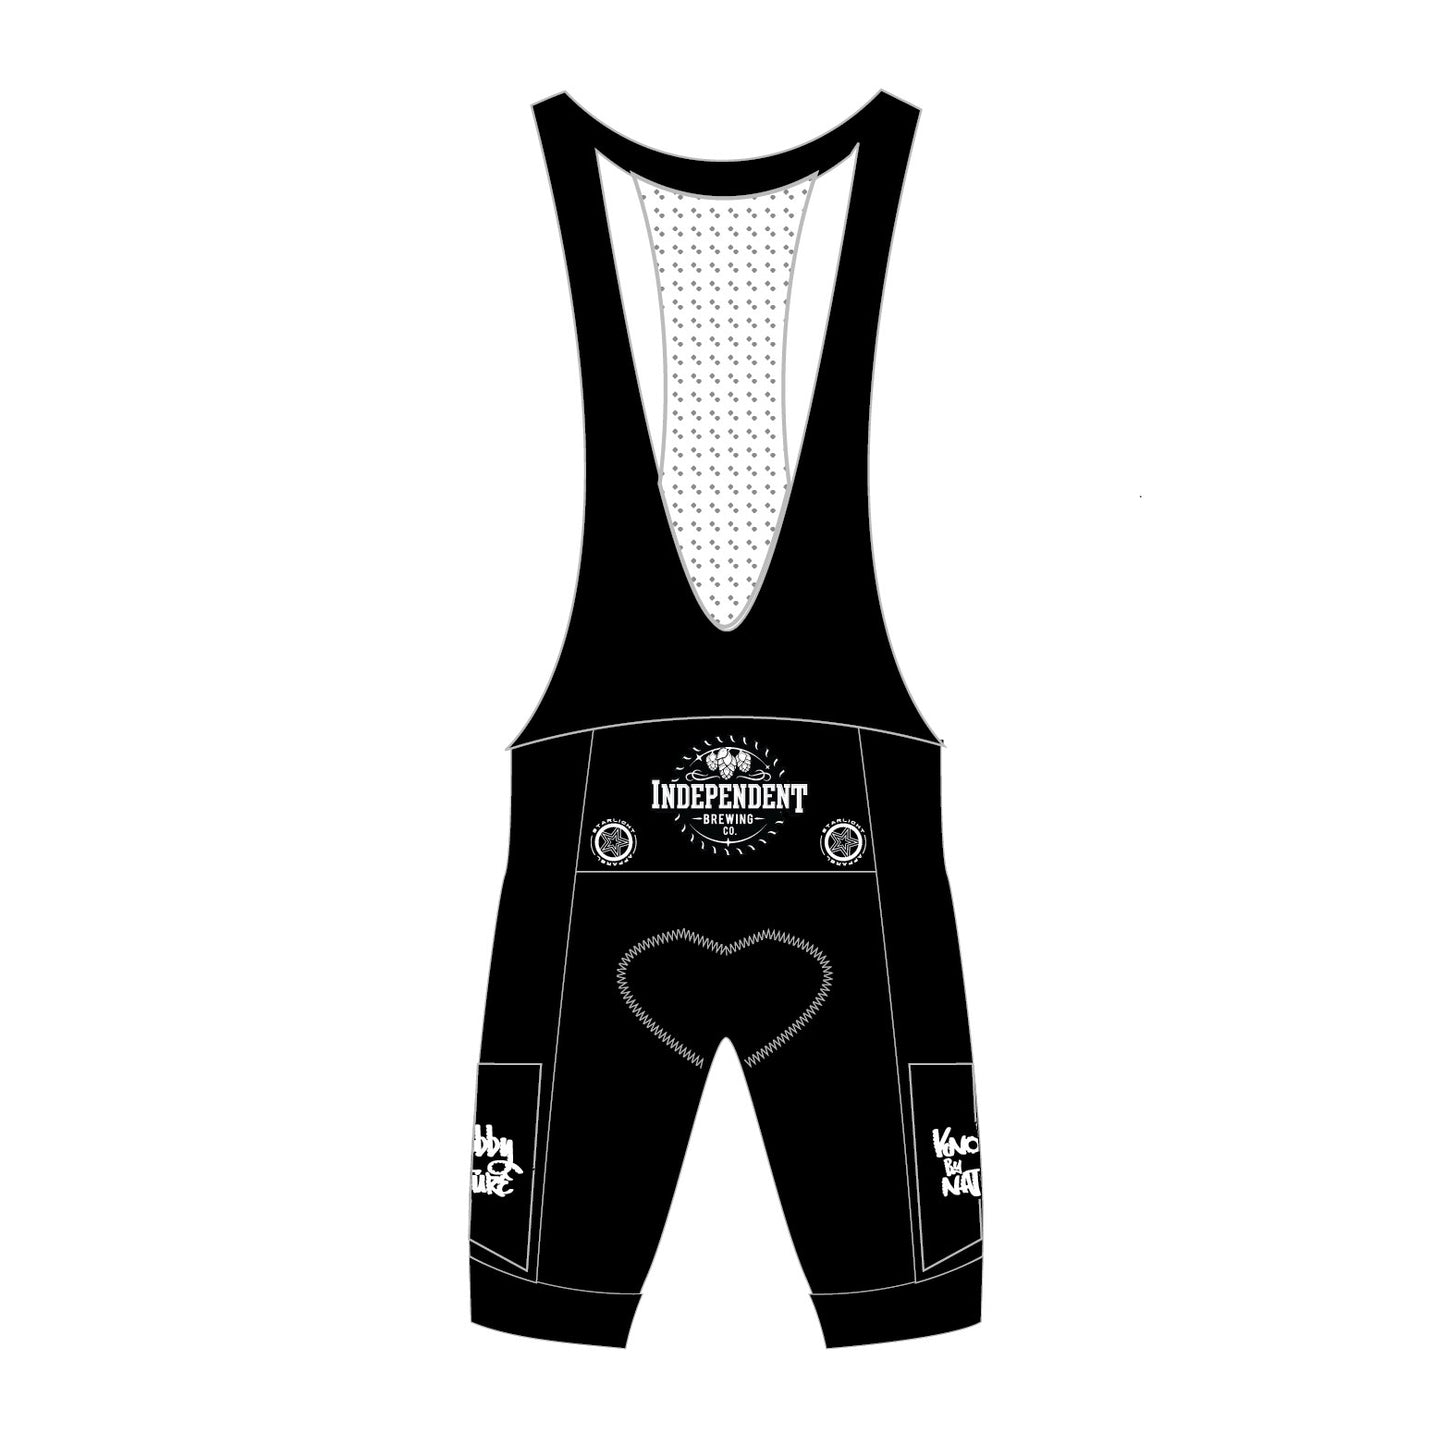 Knobby By Nature Pro+ Adventure Bibs